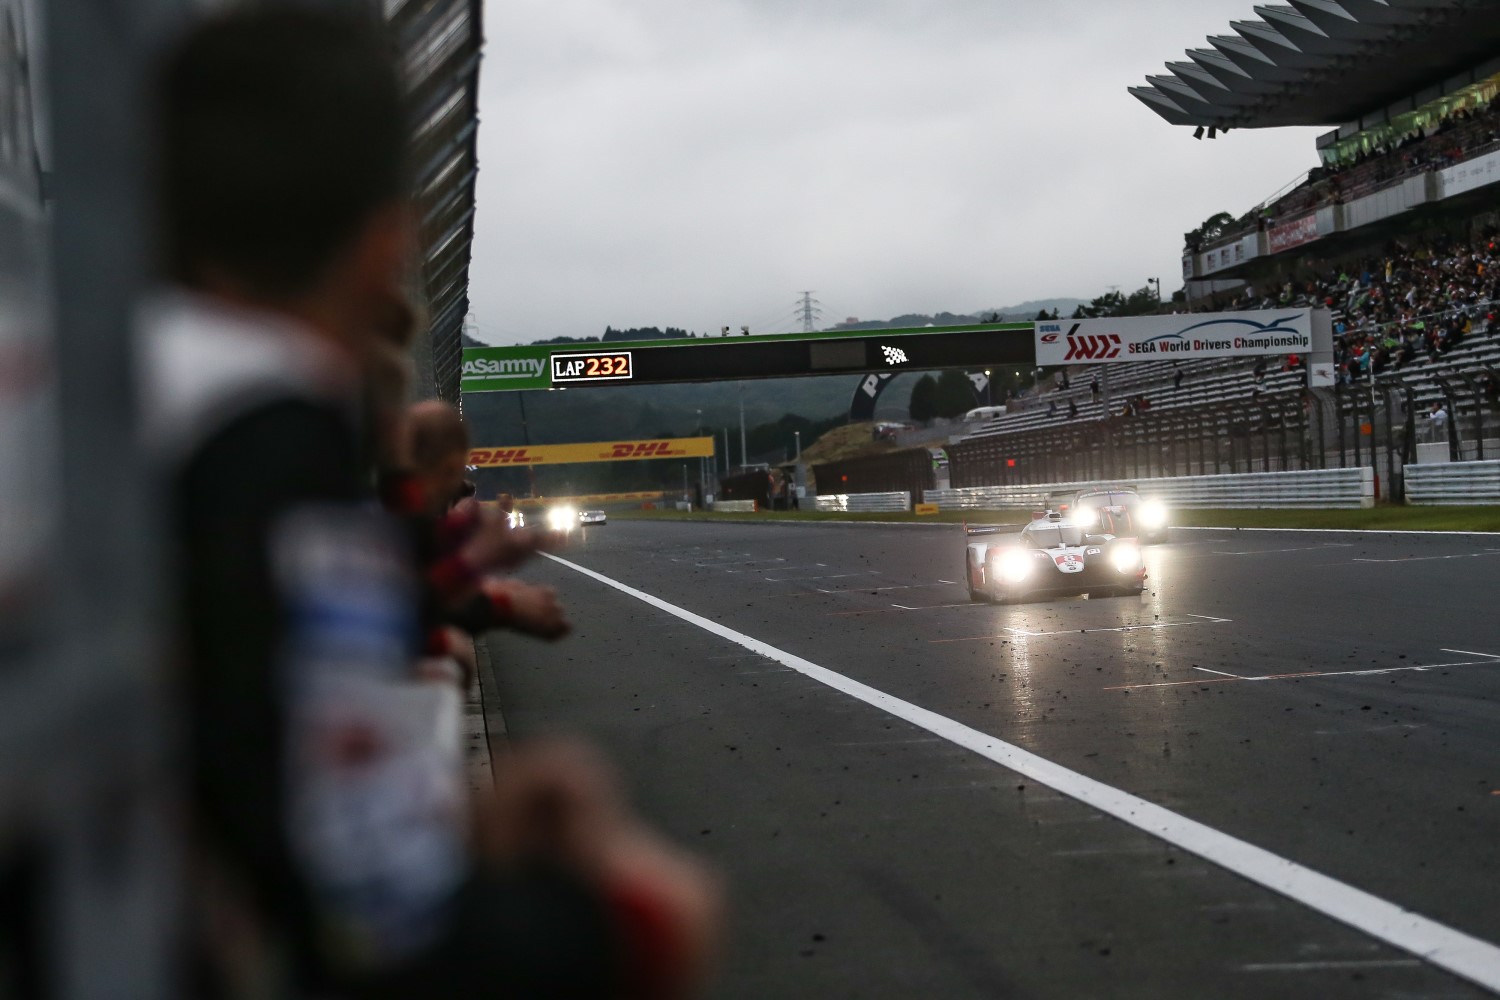 Darkness descends upon Fuji at the finish